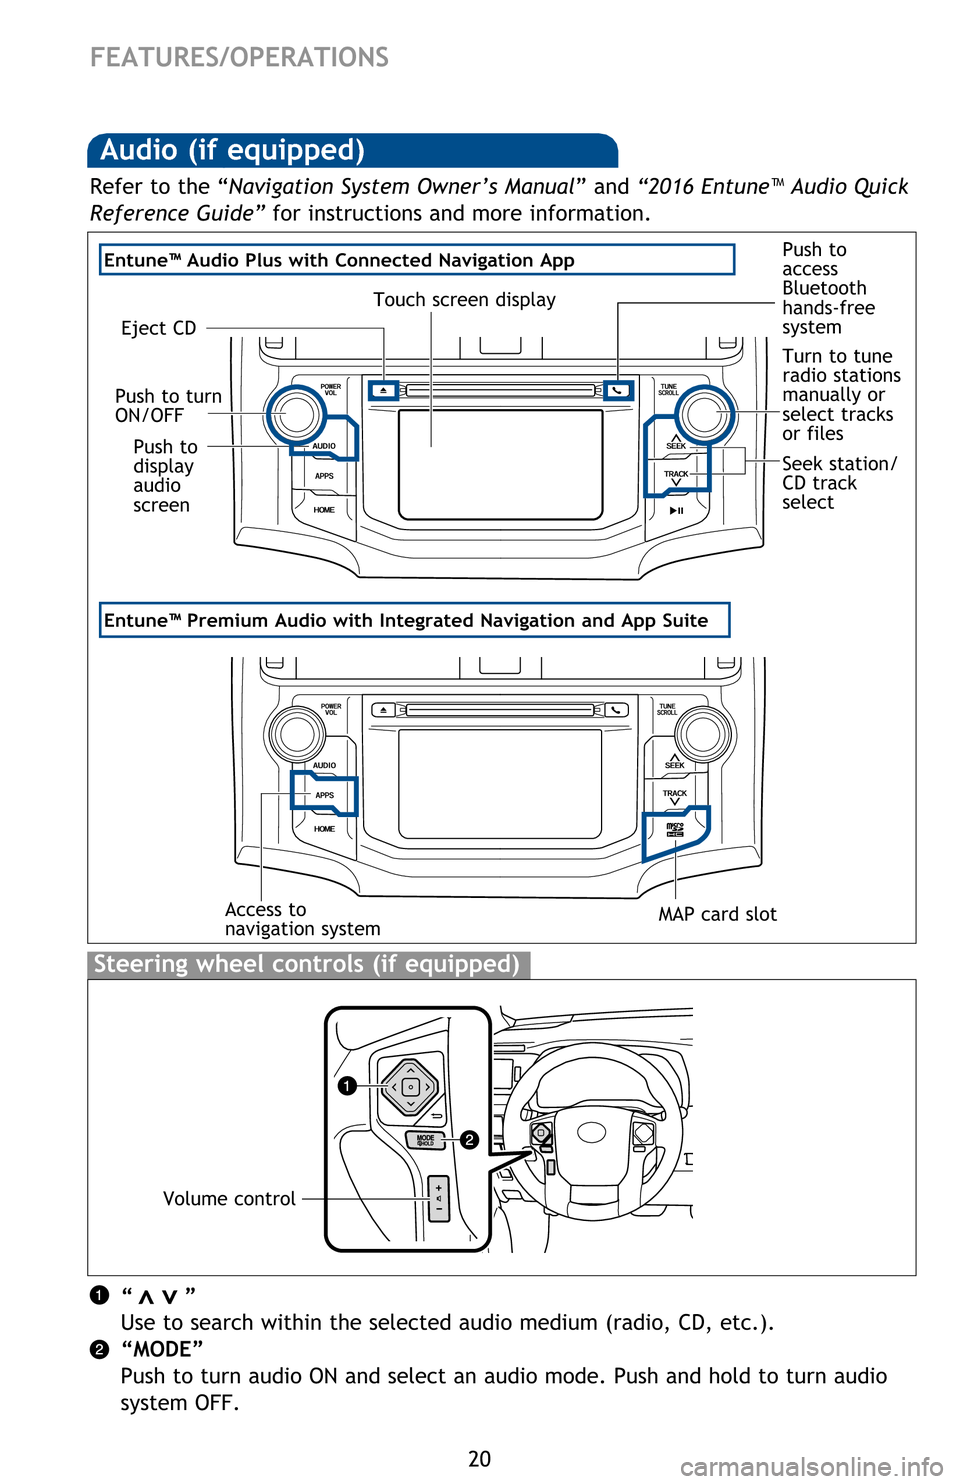 TOYOTA 4RUNNER 2016 N280 / 5.G Quick Reference Guide 20
“       ” 
Use to search within the selected audio medium (radio, CD, etc.).
“MODE” 
Push to turn audio ON and select an audio mode. Push and hold to turn audio 
system OFF.>>
Steering whee